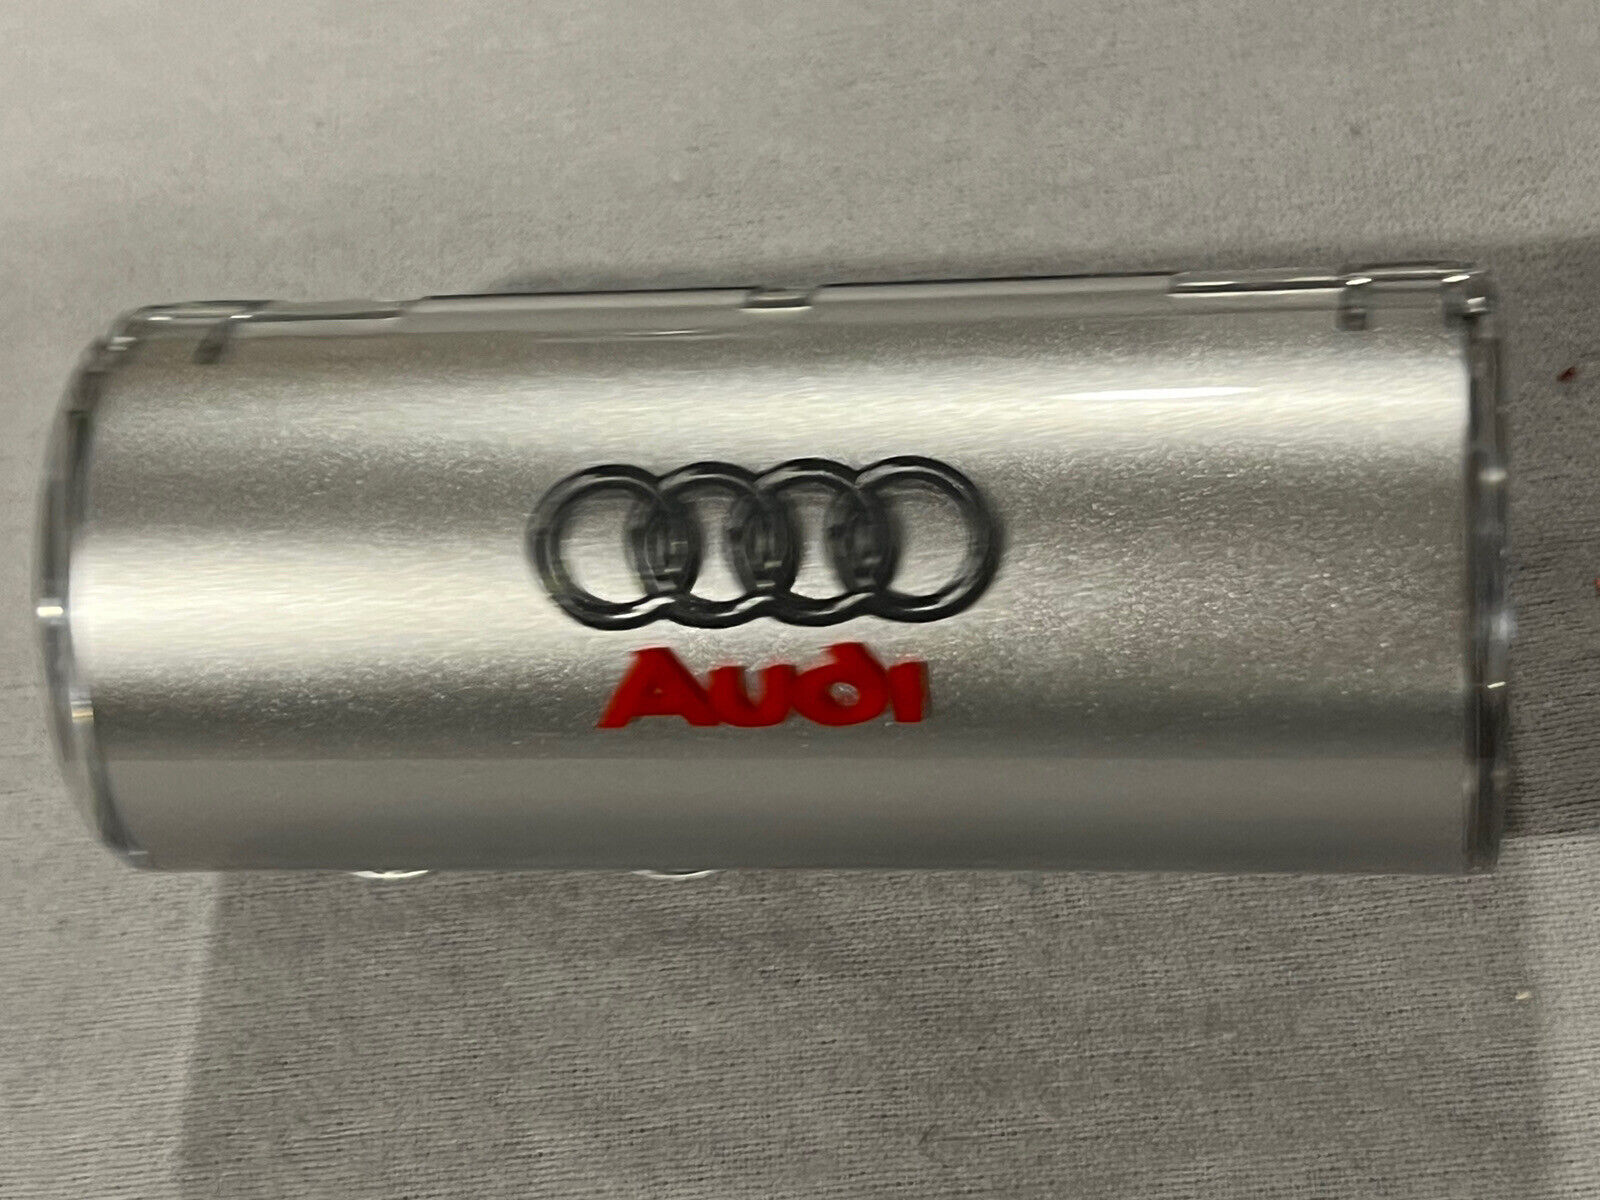 Audi Tube See-Through Collectible Clock Radio. Very Rare, Never Used.